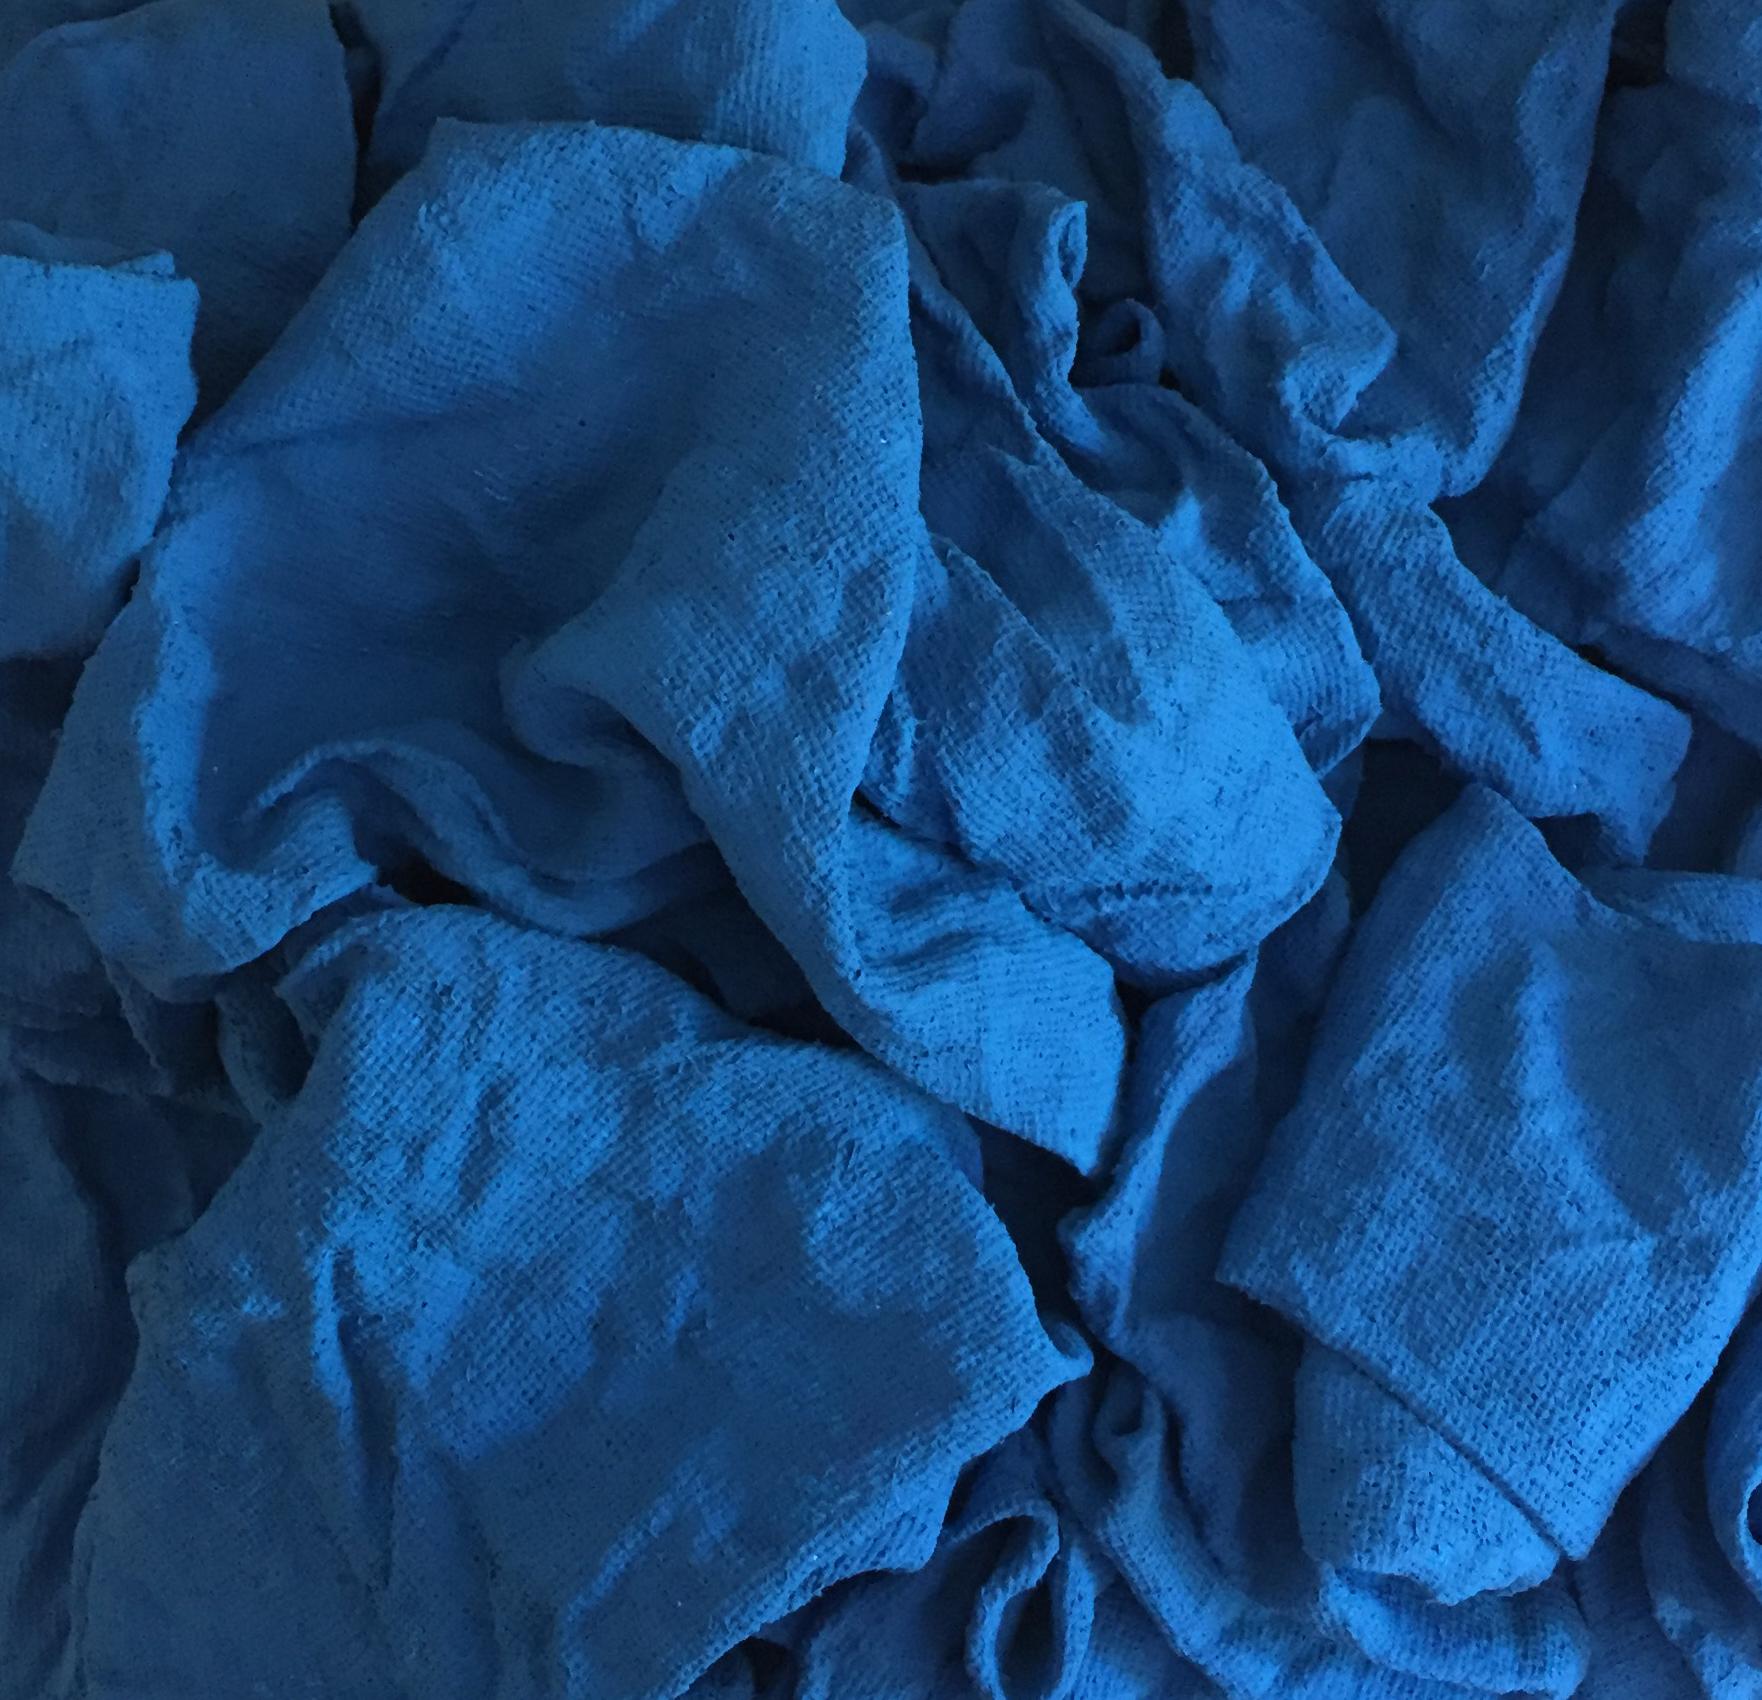 Electric Blue Folds - Abstract Mixed Media Art by Chloe Hedden